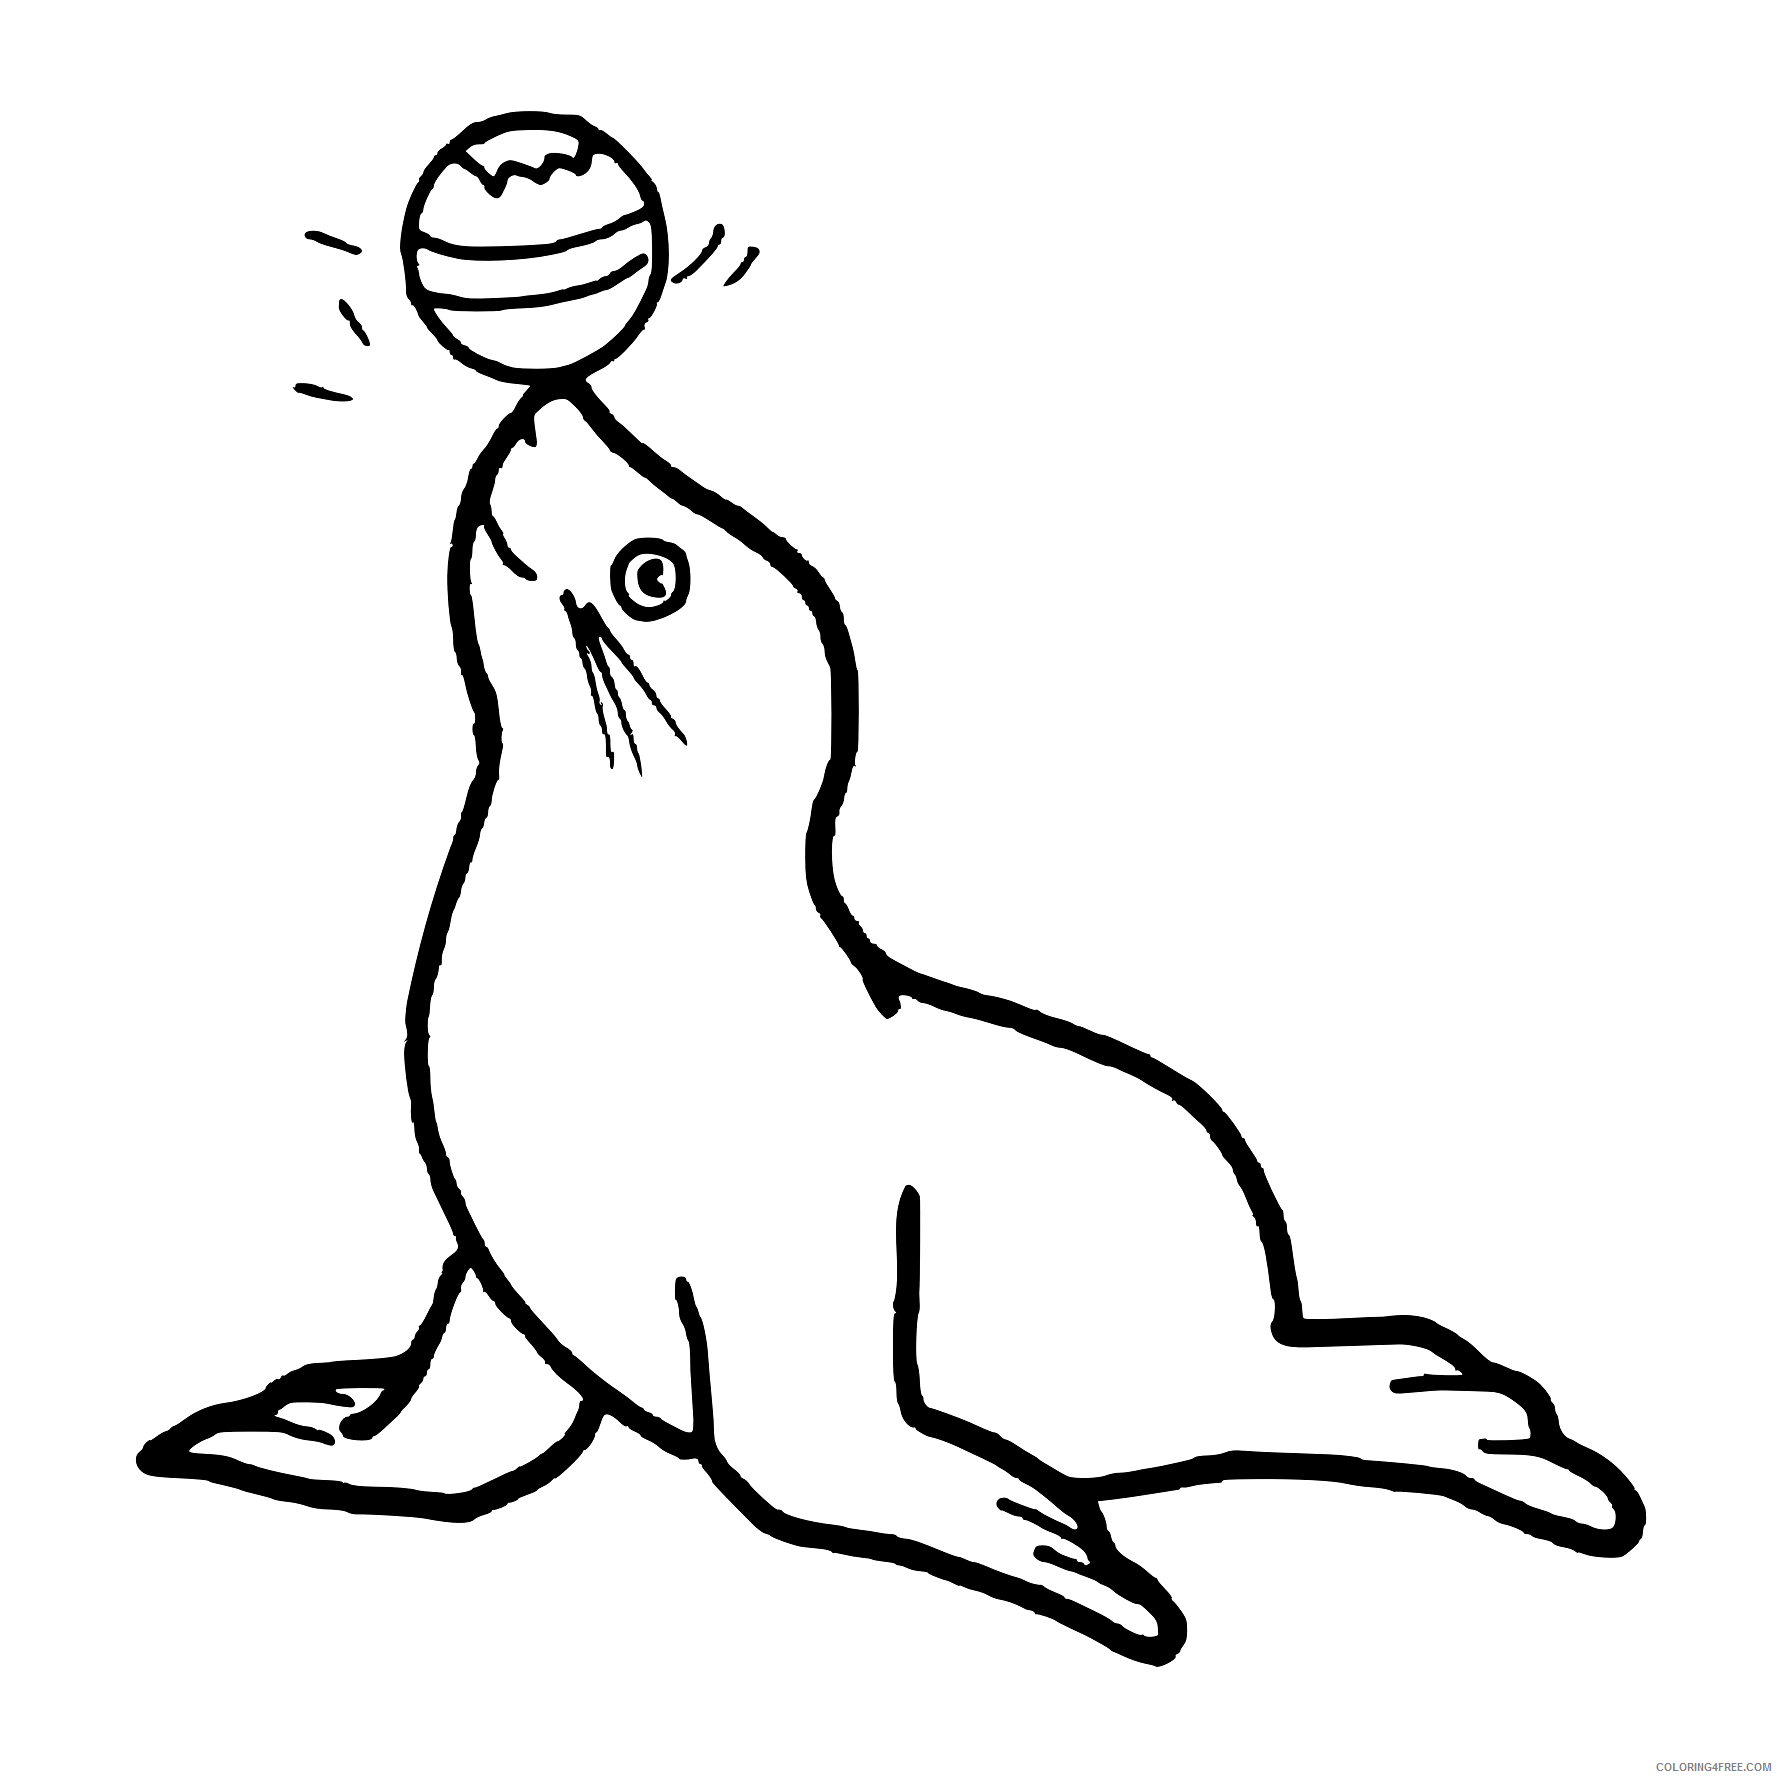 Seal Coloring Pages seal black and Printable Coloring4free